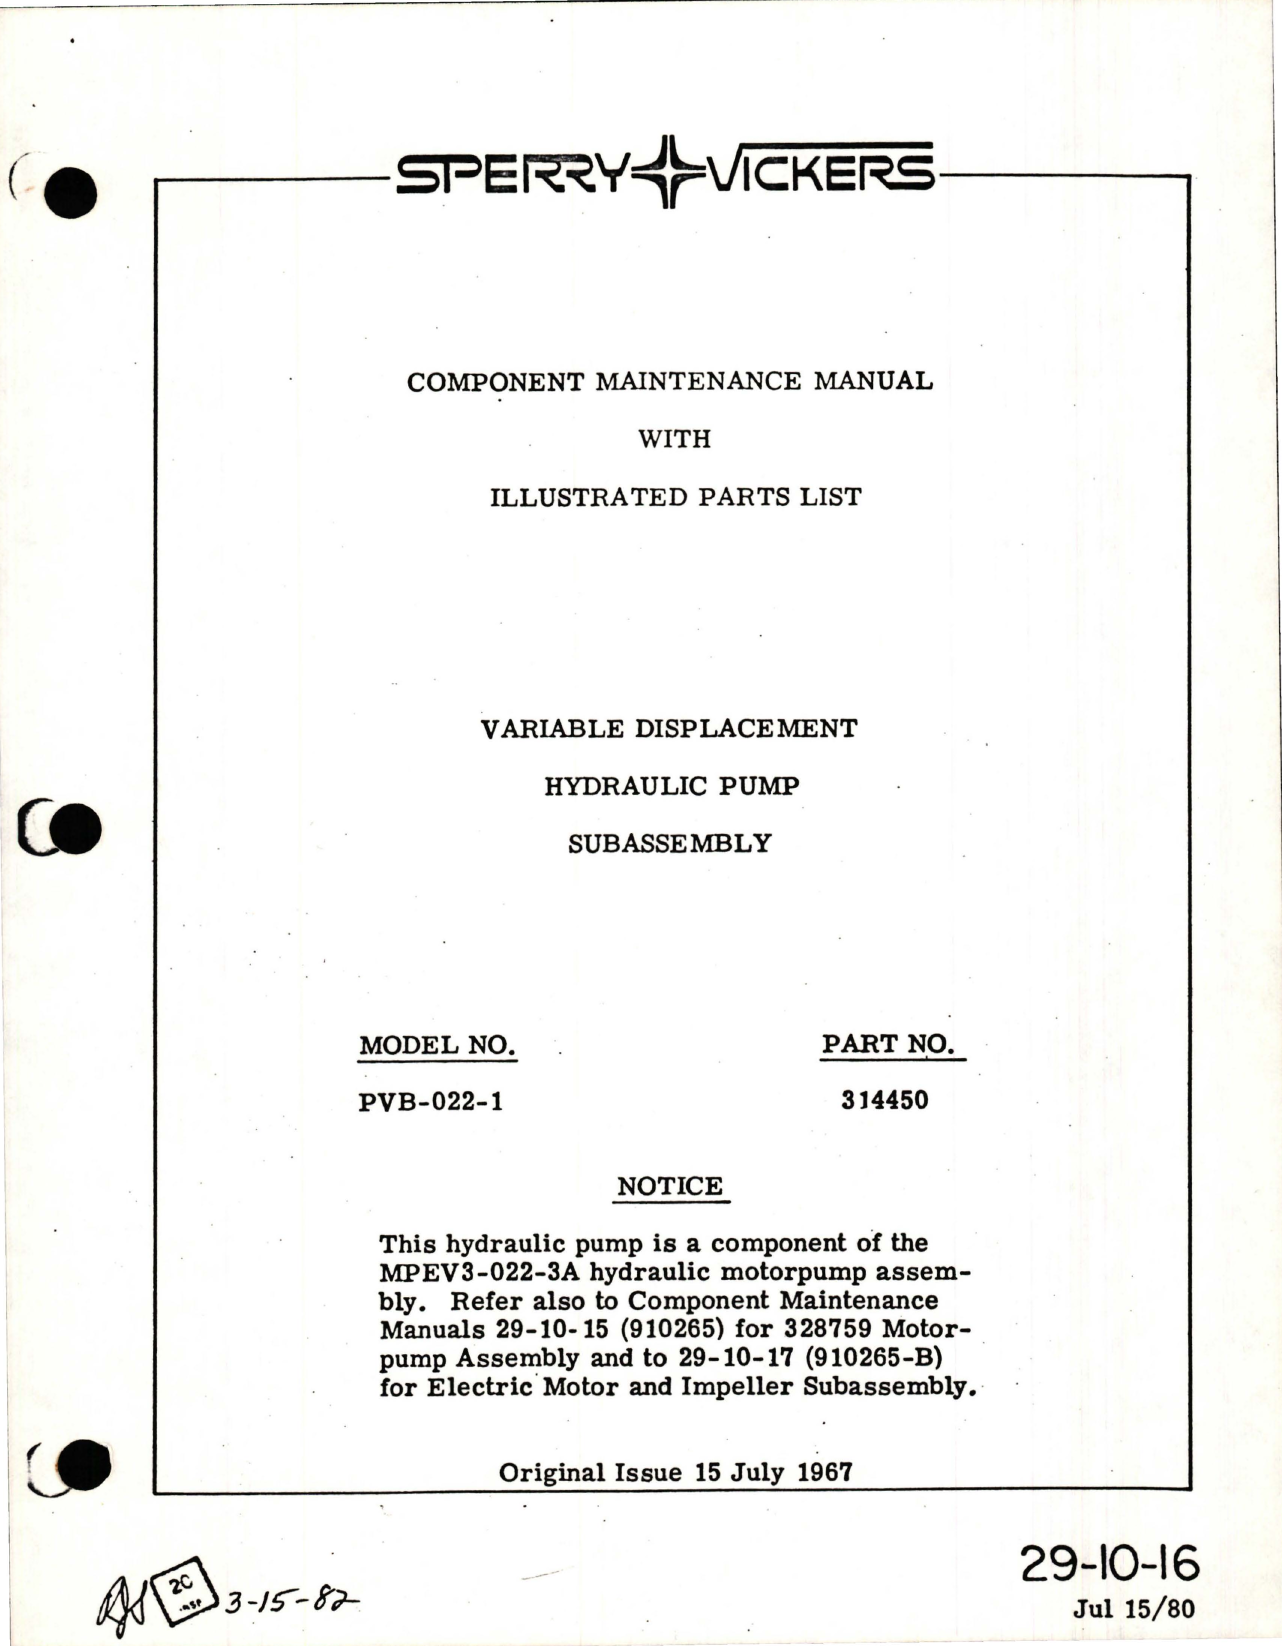 Sample page 1 from AirCorps Library document: Maintenance with Illustrated Parts List for Variable Displacement Hydraulic Pump Subassembly - Part 314450 - Model PVB-022-1